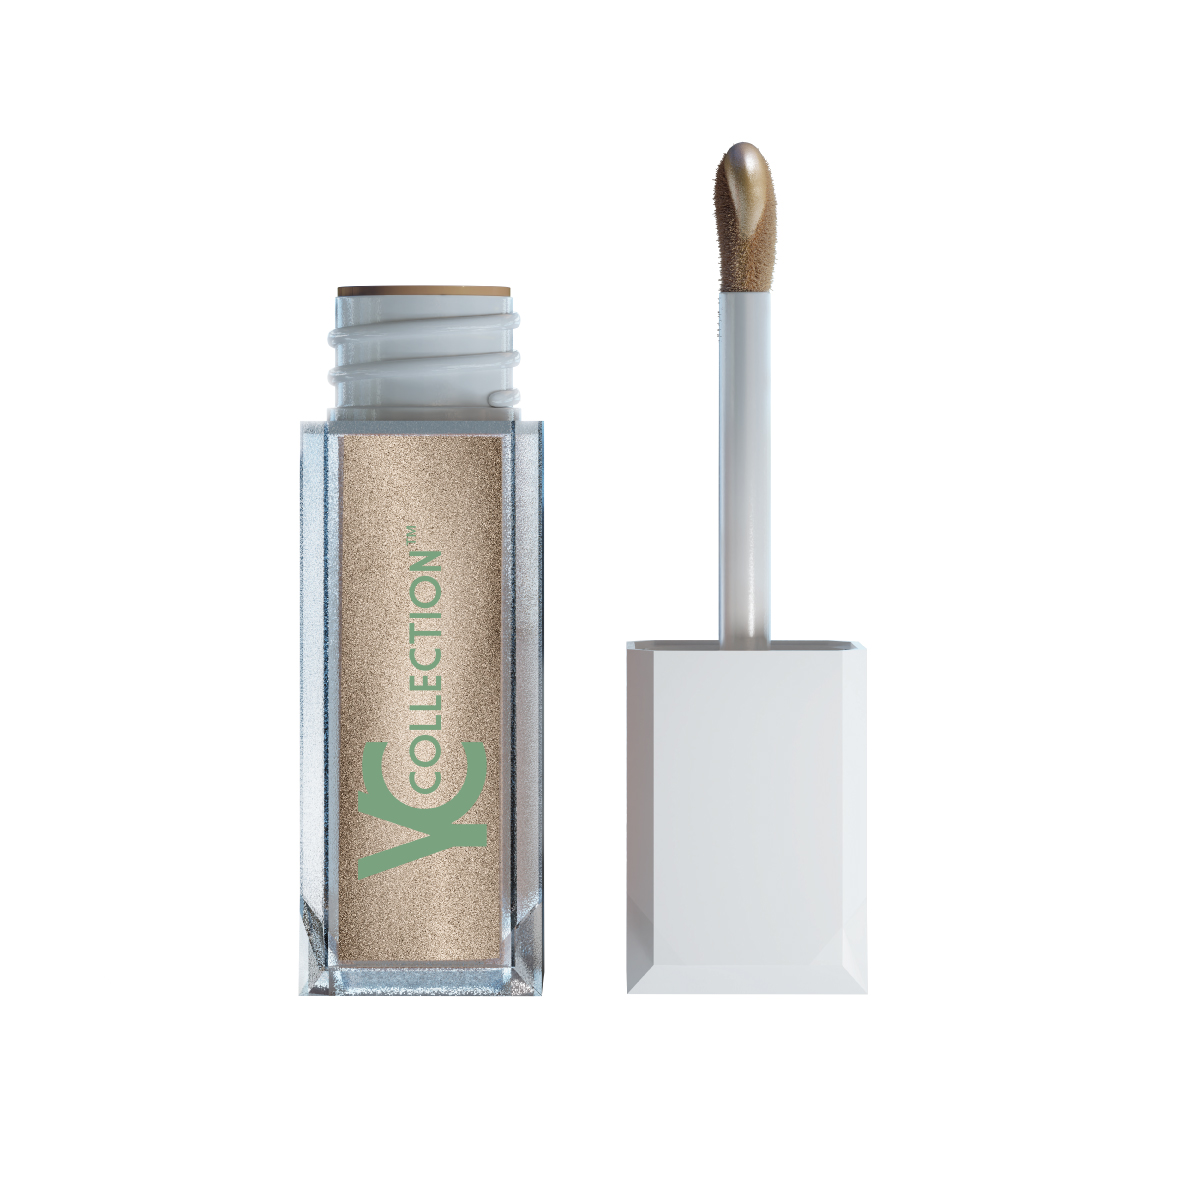 Multi-use face and body liquid highlighter for a natural glow